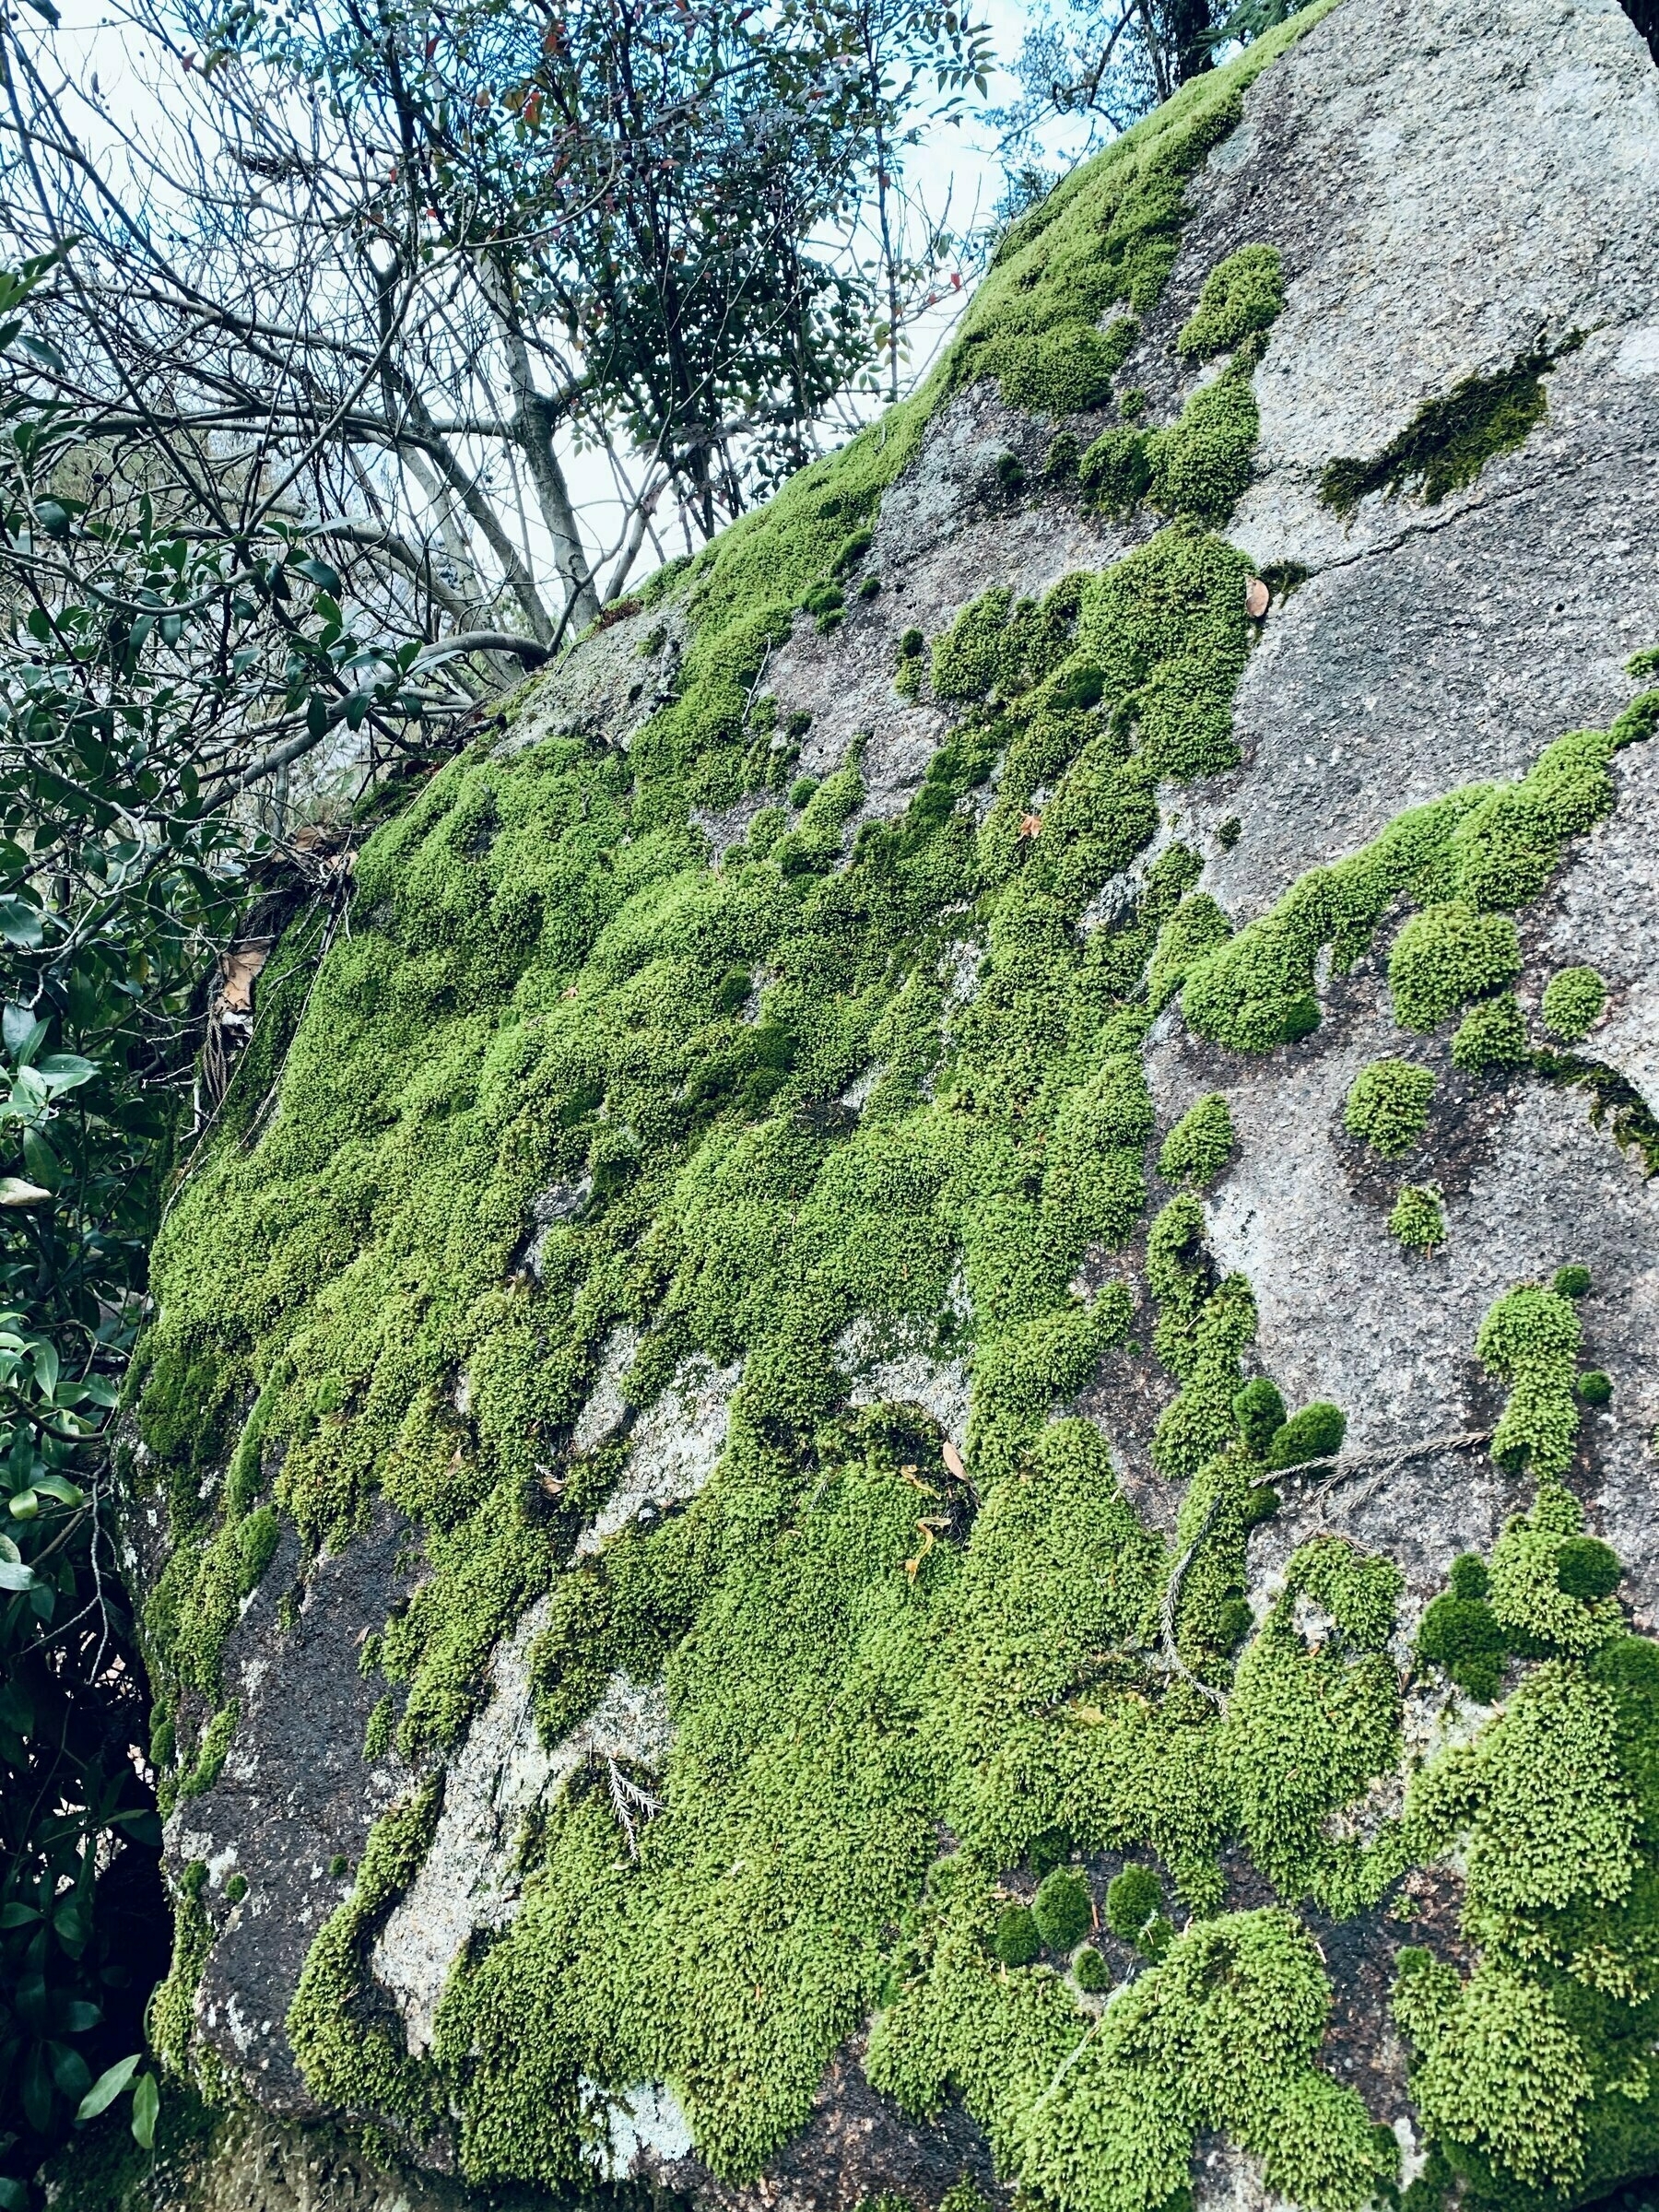 Moss grows on the side of the big boulder.